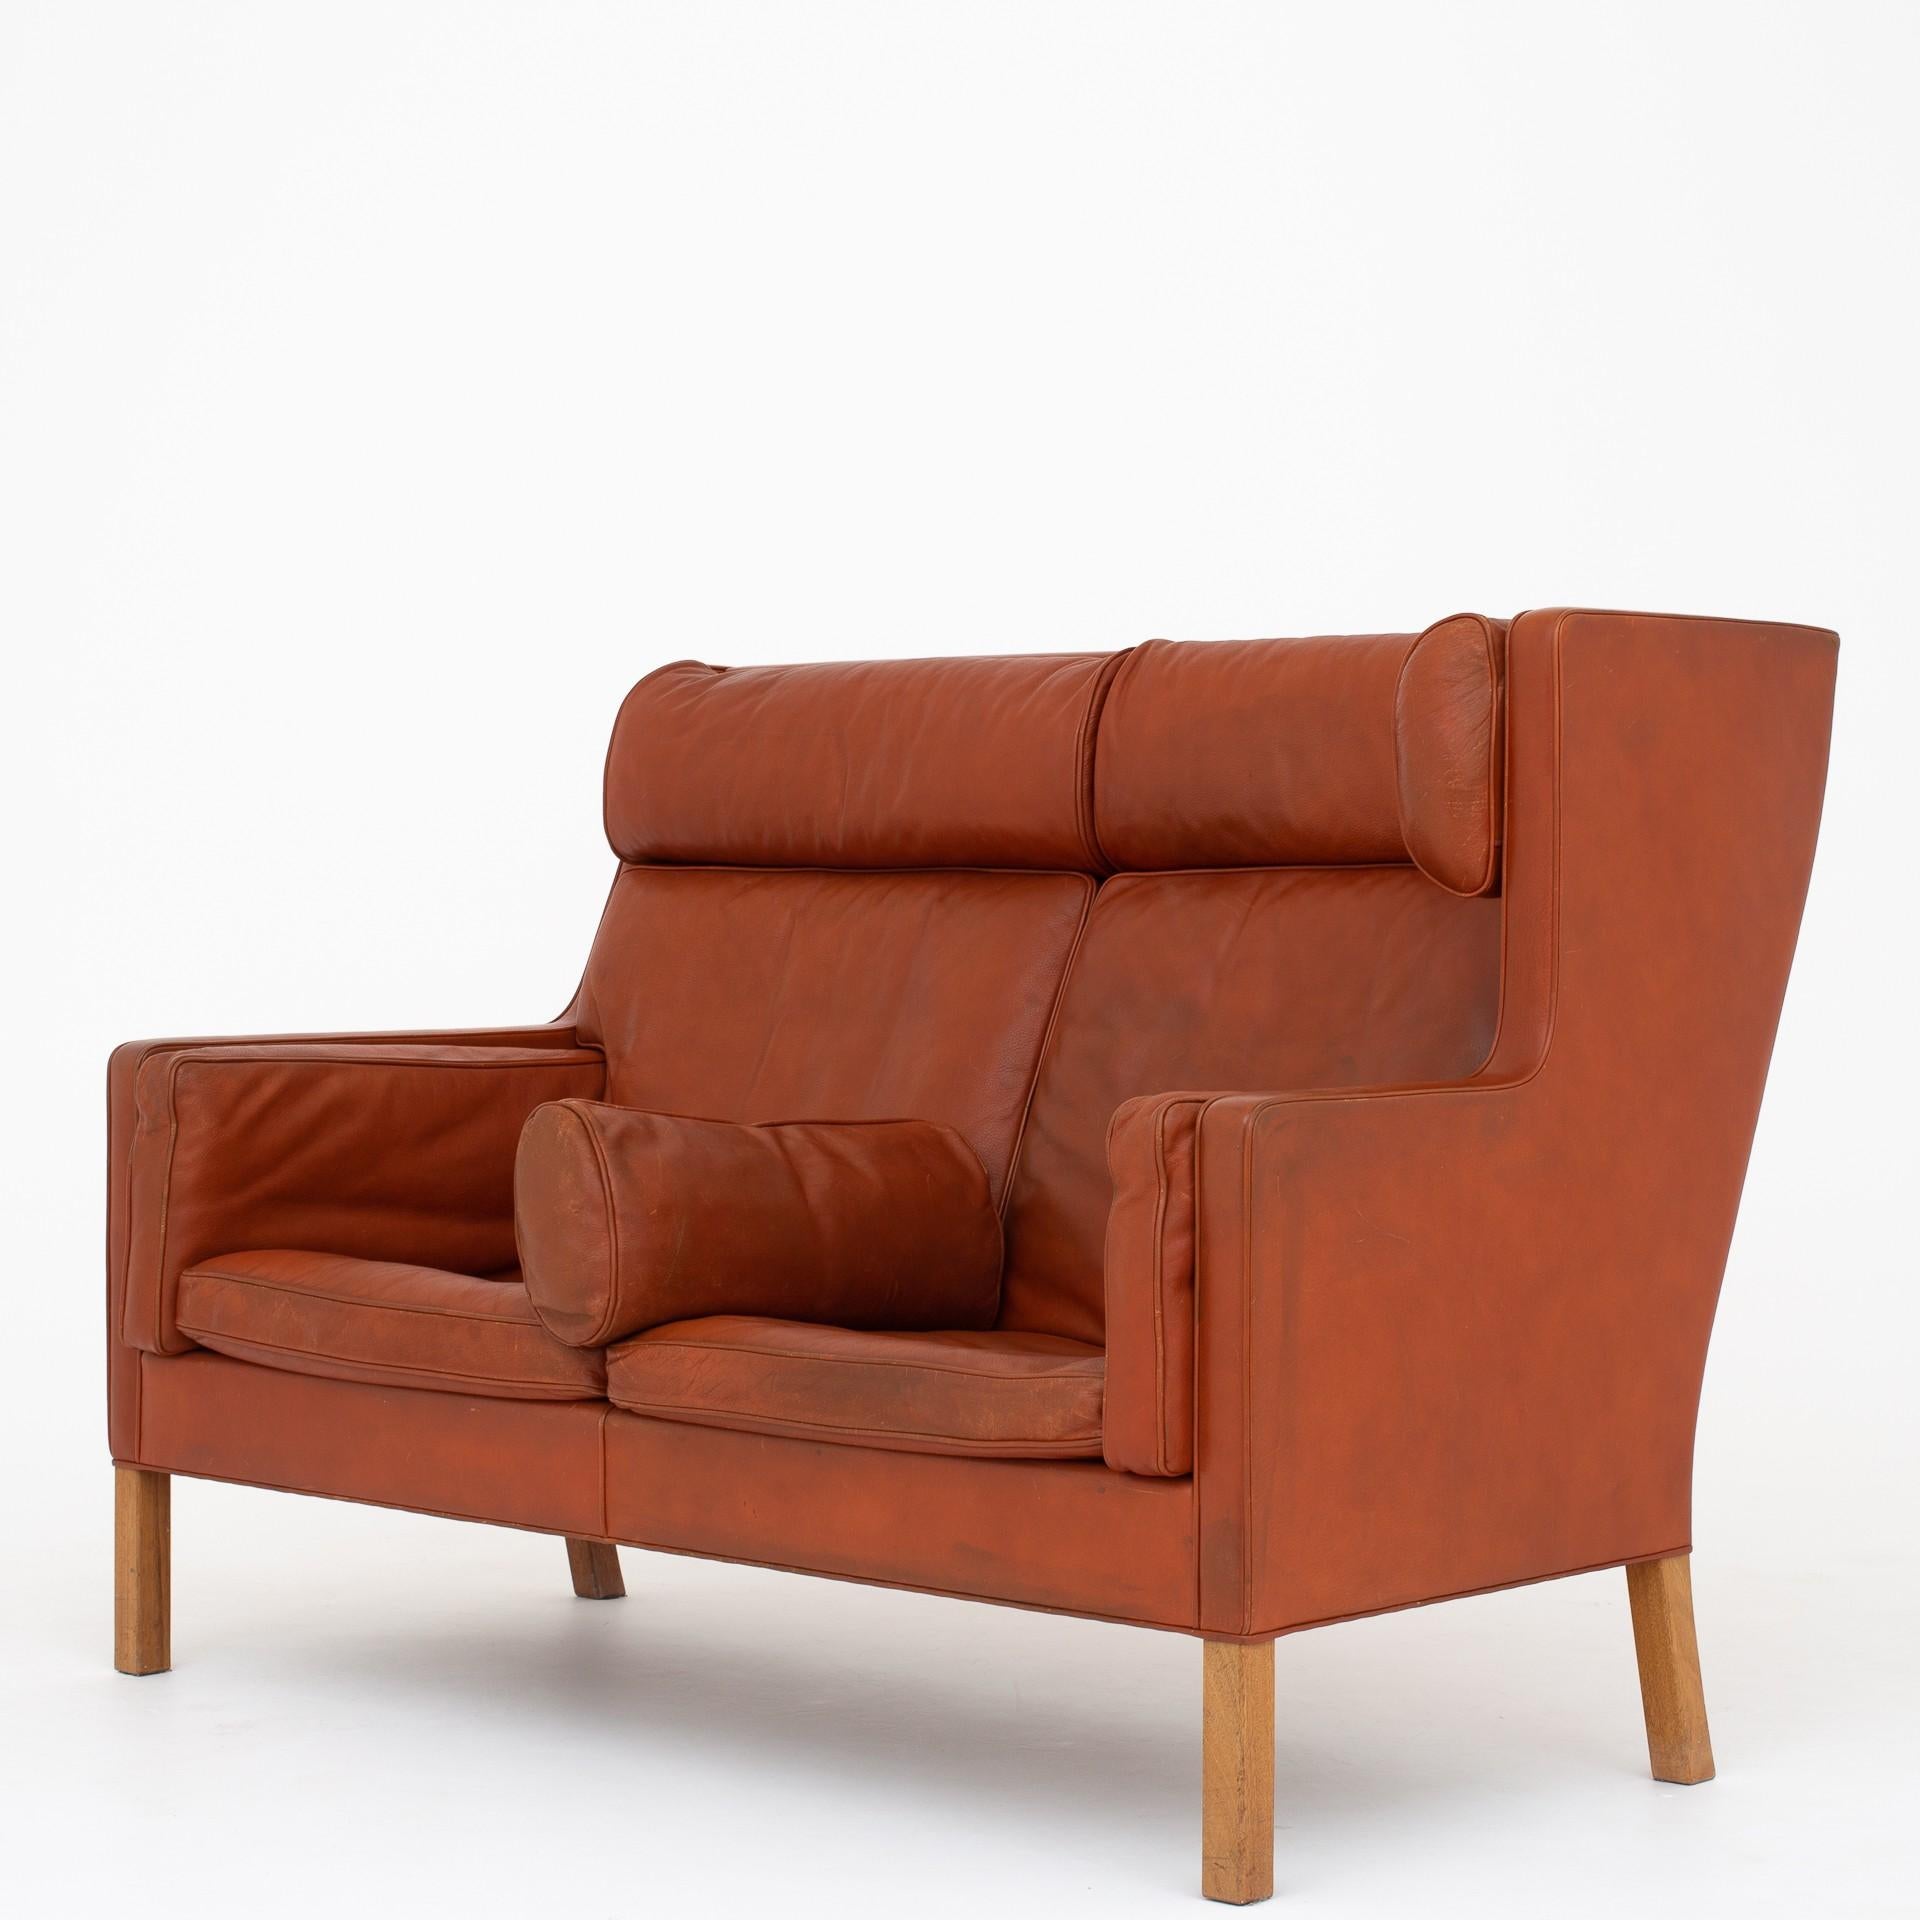 Coupésofa in a rare corner module-edition, consisting of a right and left turned 2-seater sofa in original red/brown leather with legs in mahogany. BM 2192. Maker Fredericia Furniture.